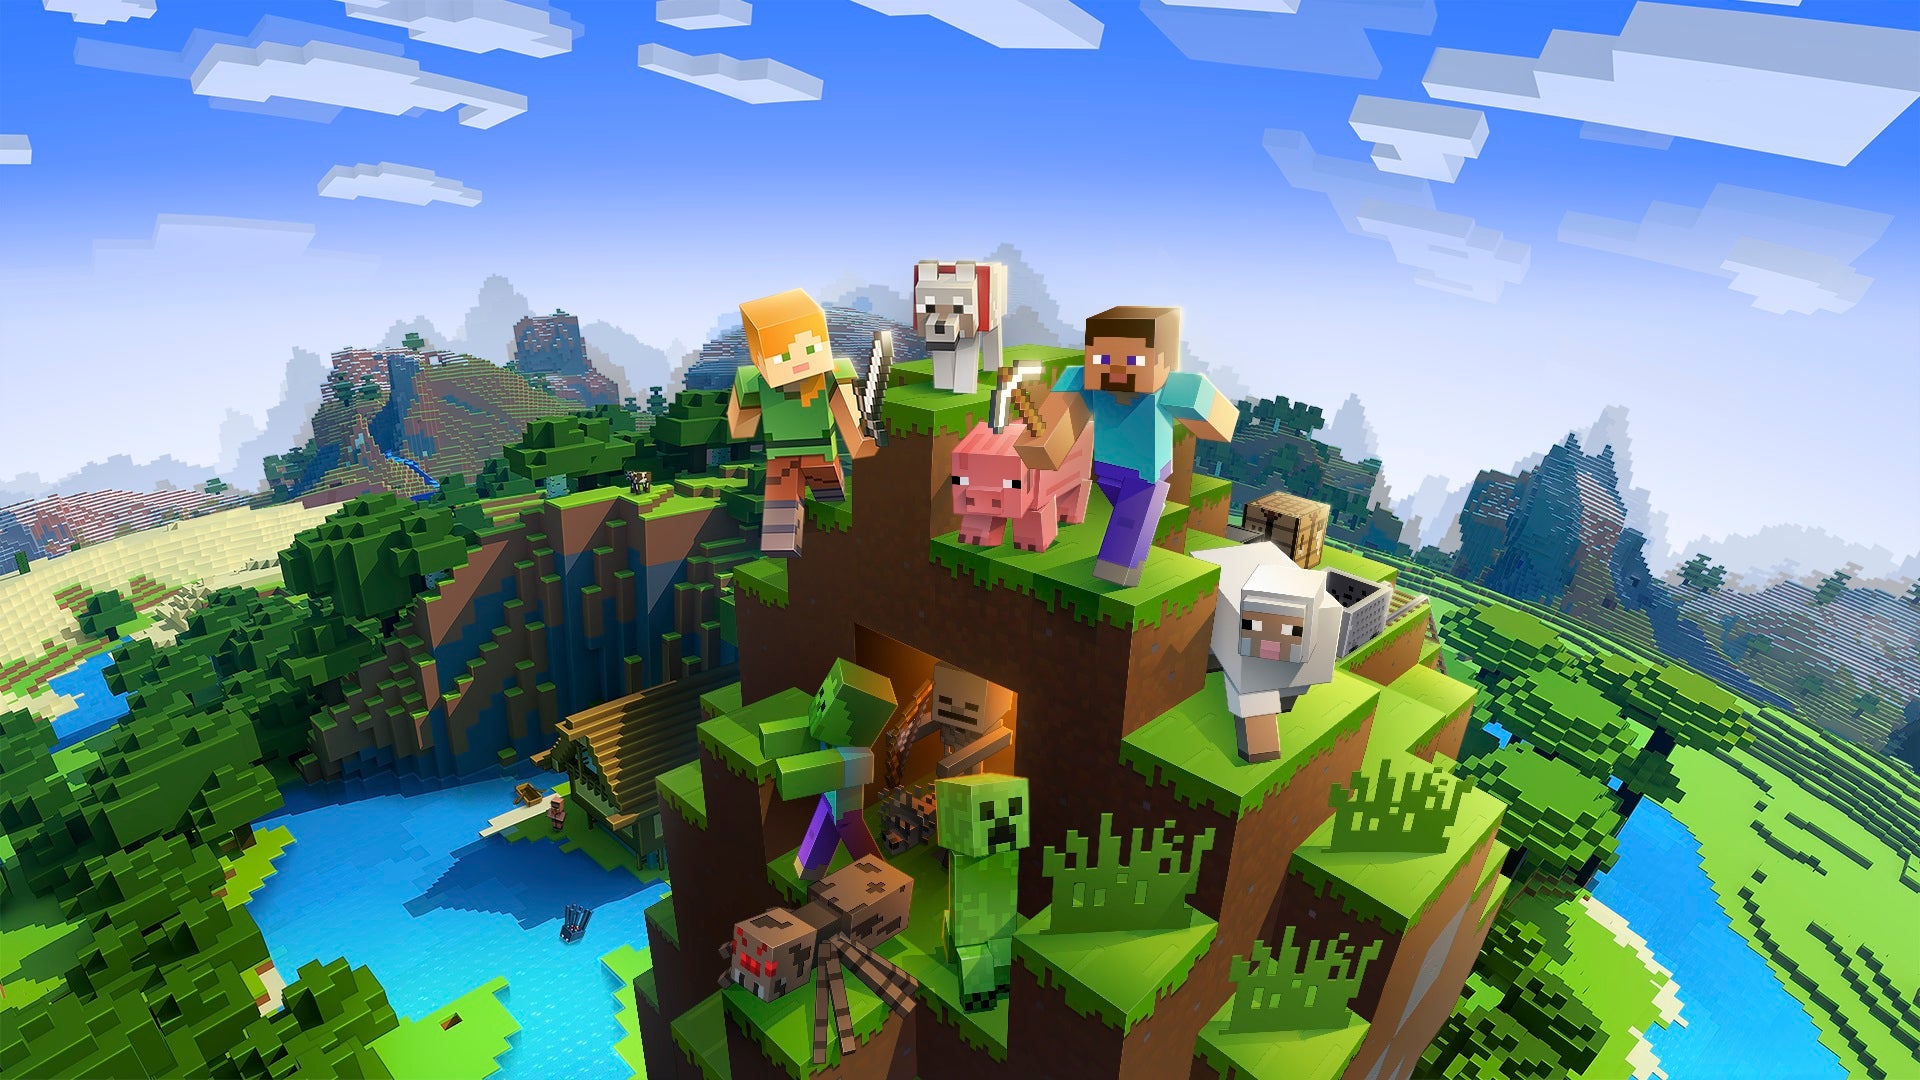 Some Minecraft characters and animals hanging out on a nice pile of dirt blocks.